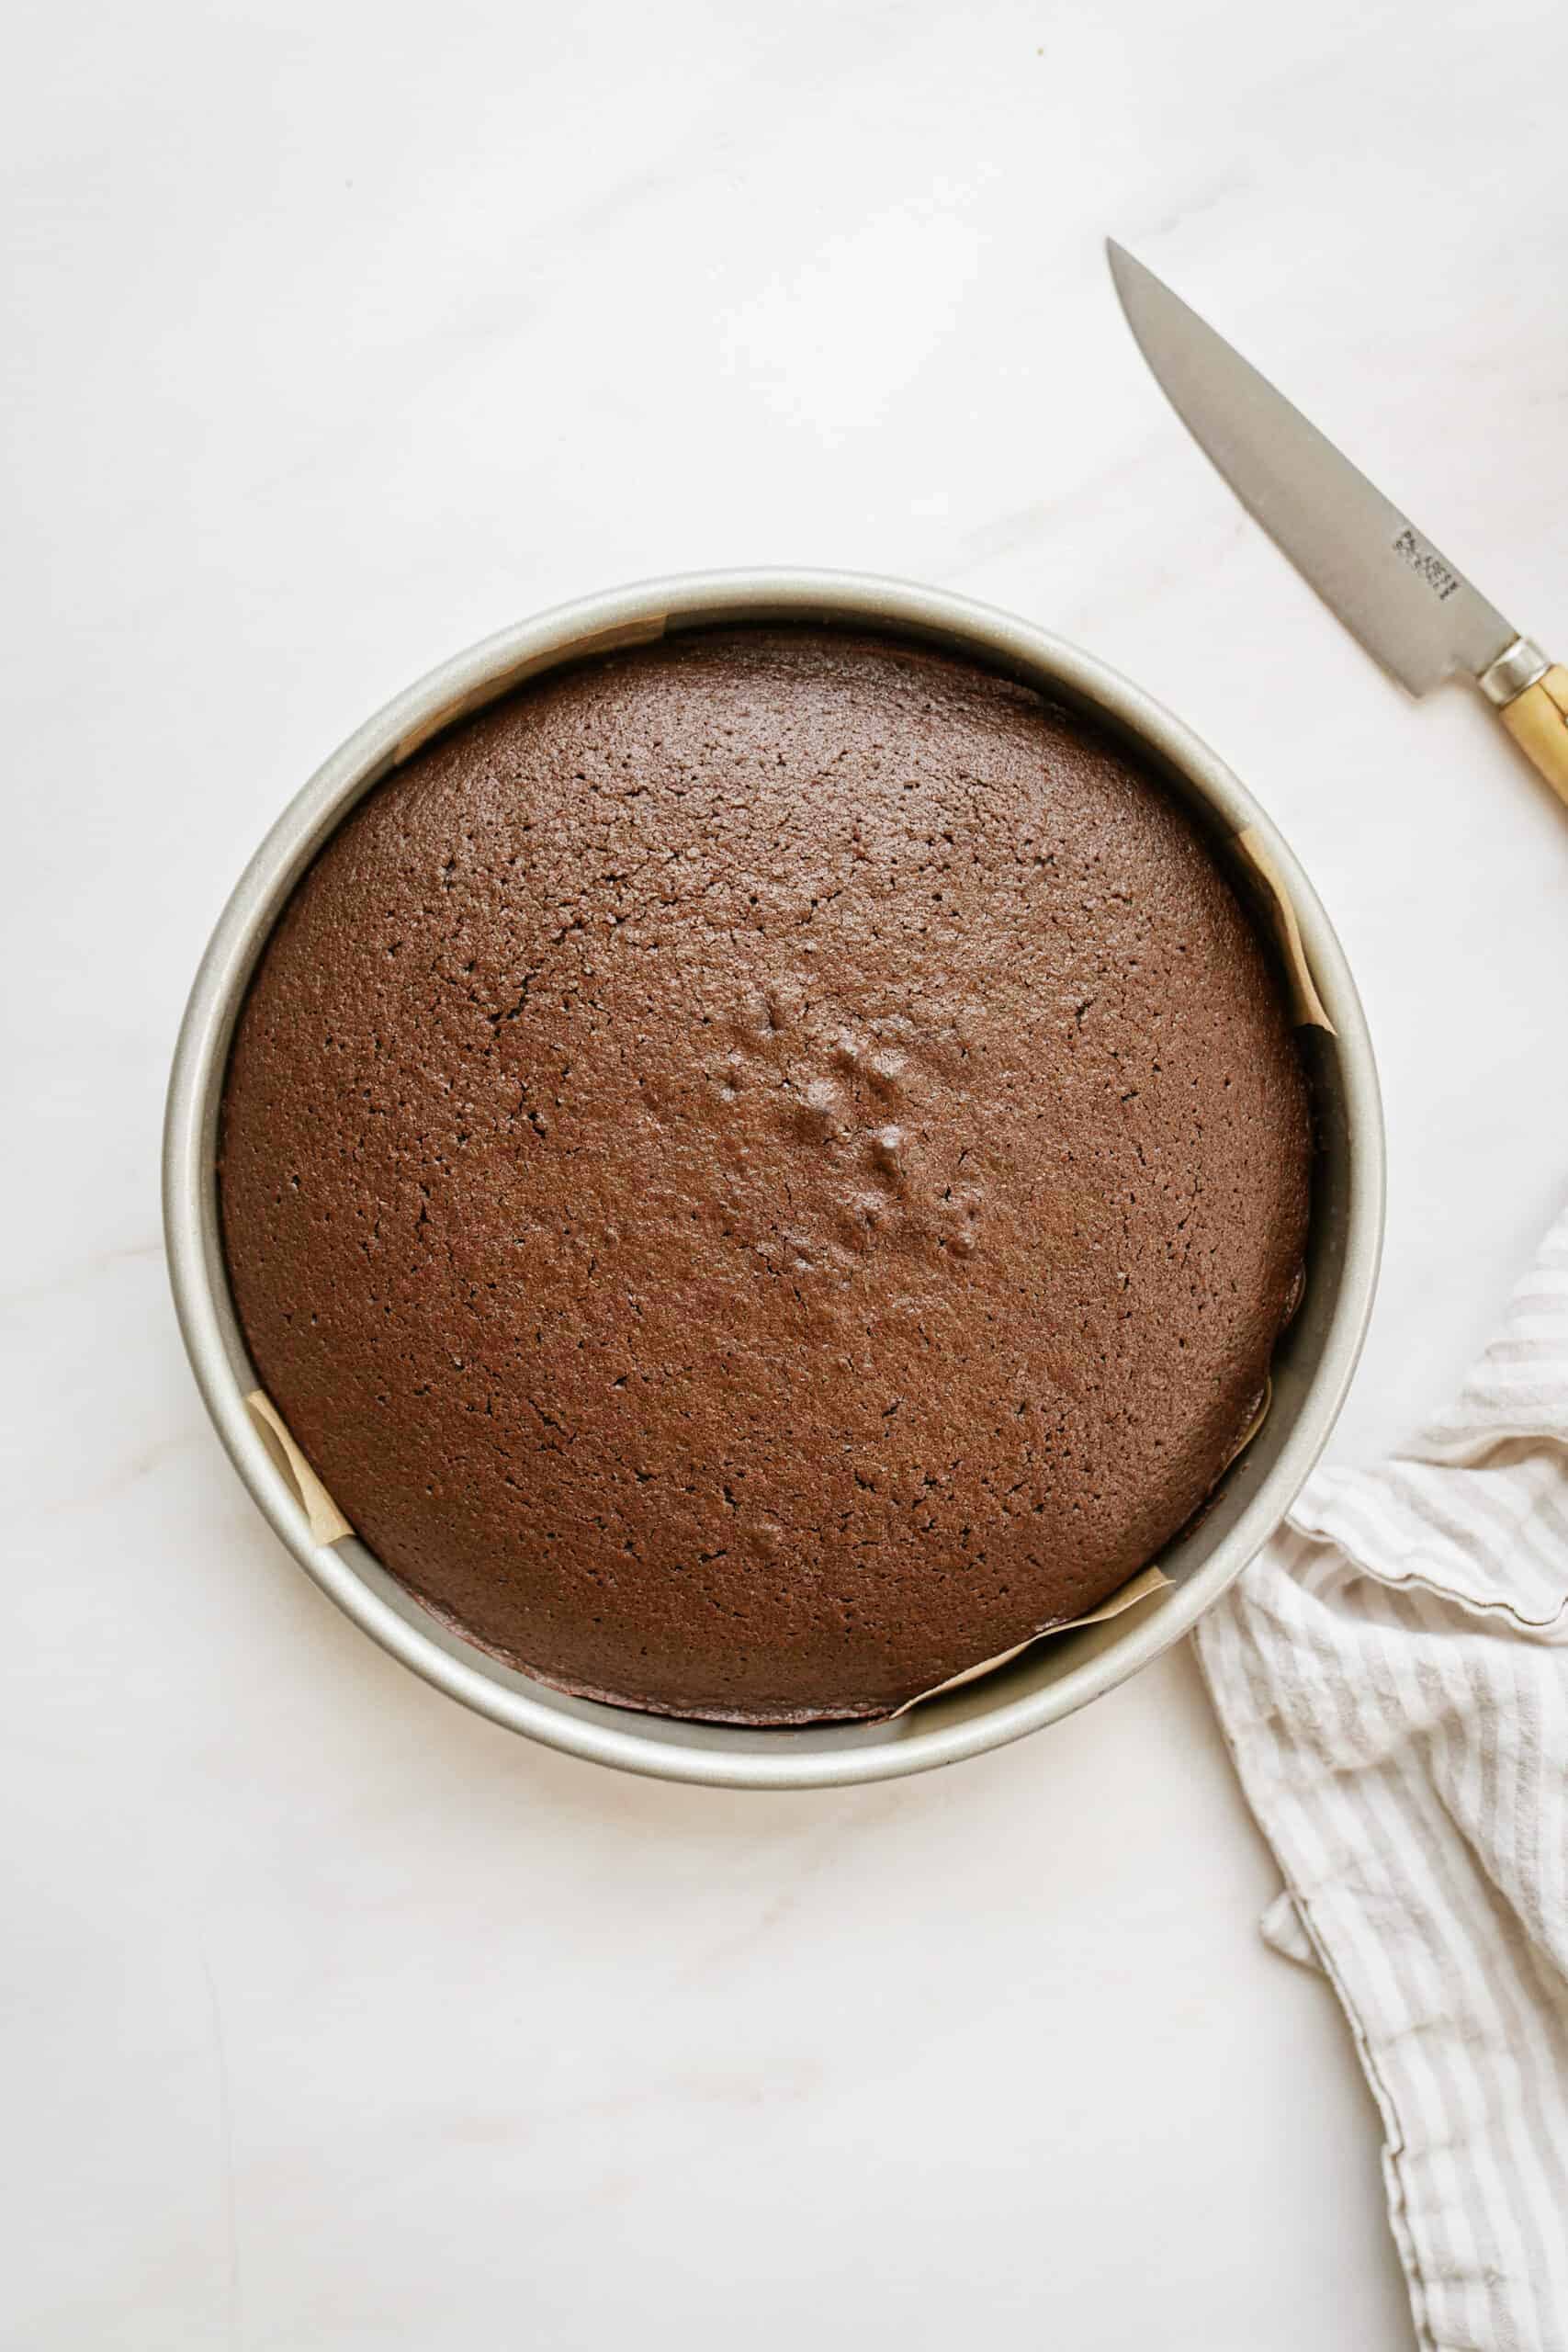 Chocolate Olive Oil Cake in a pan